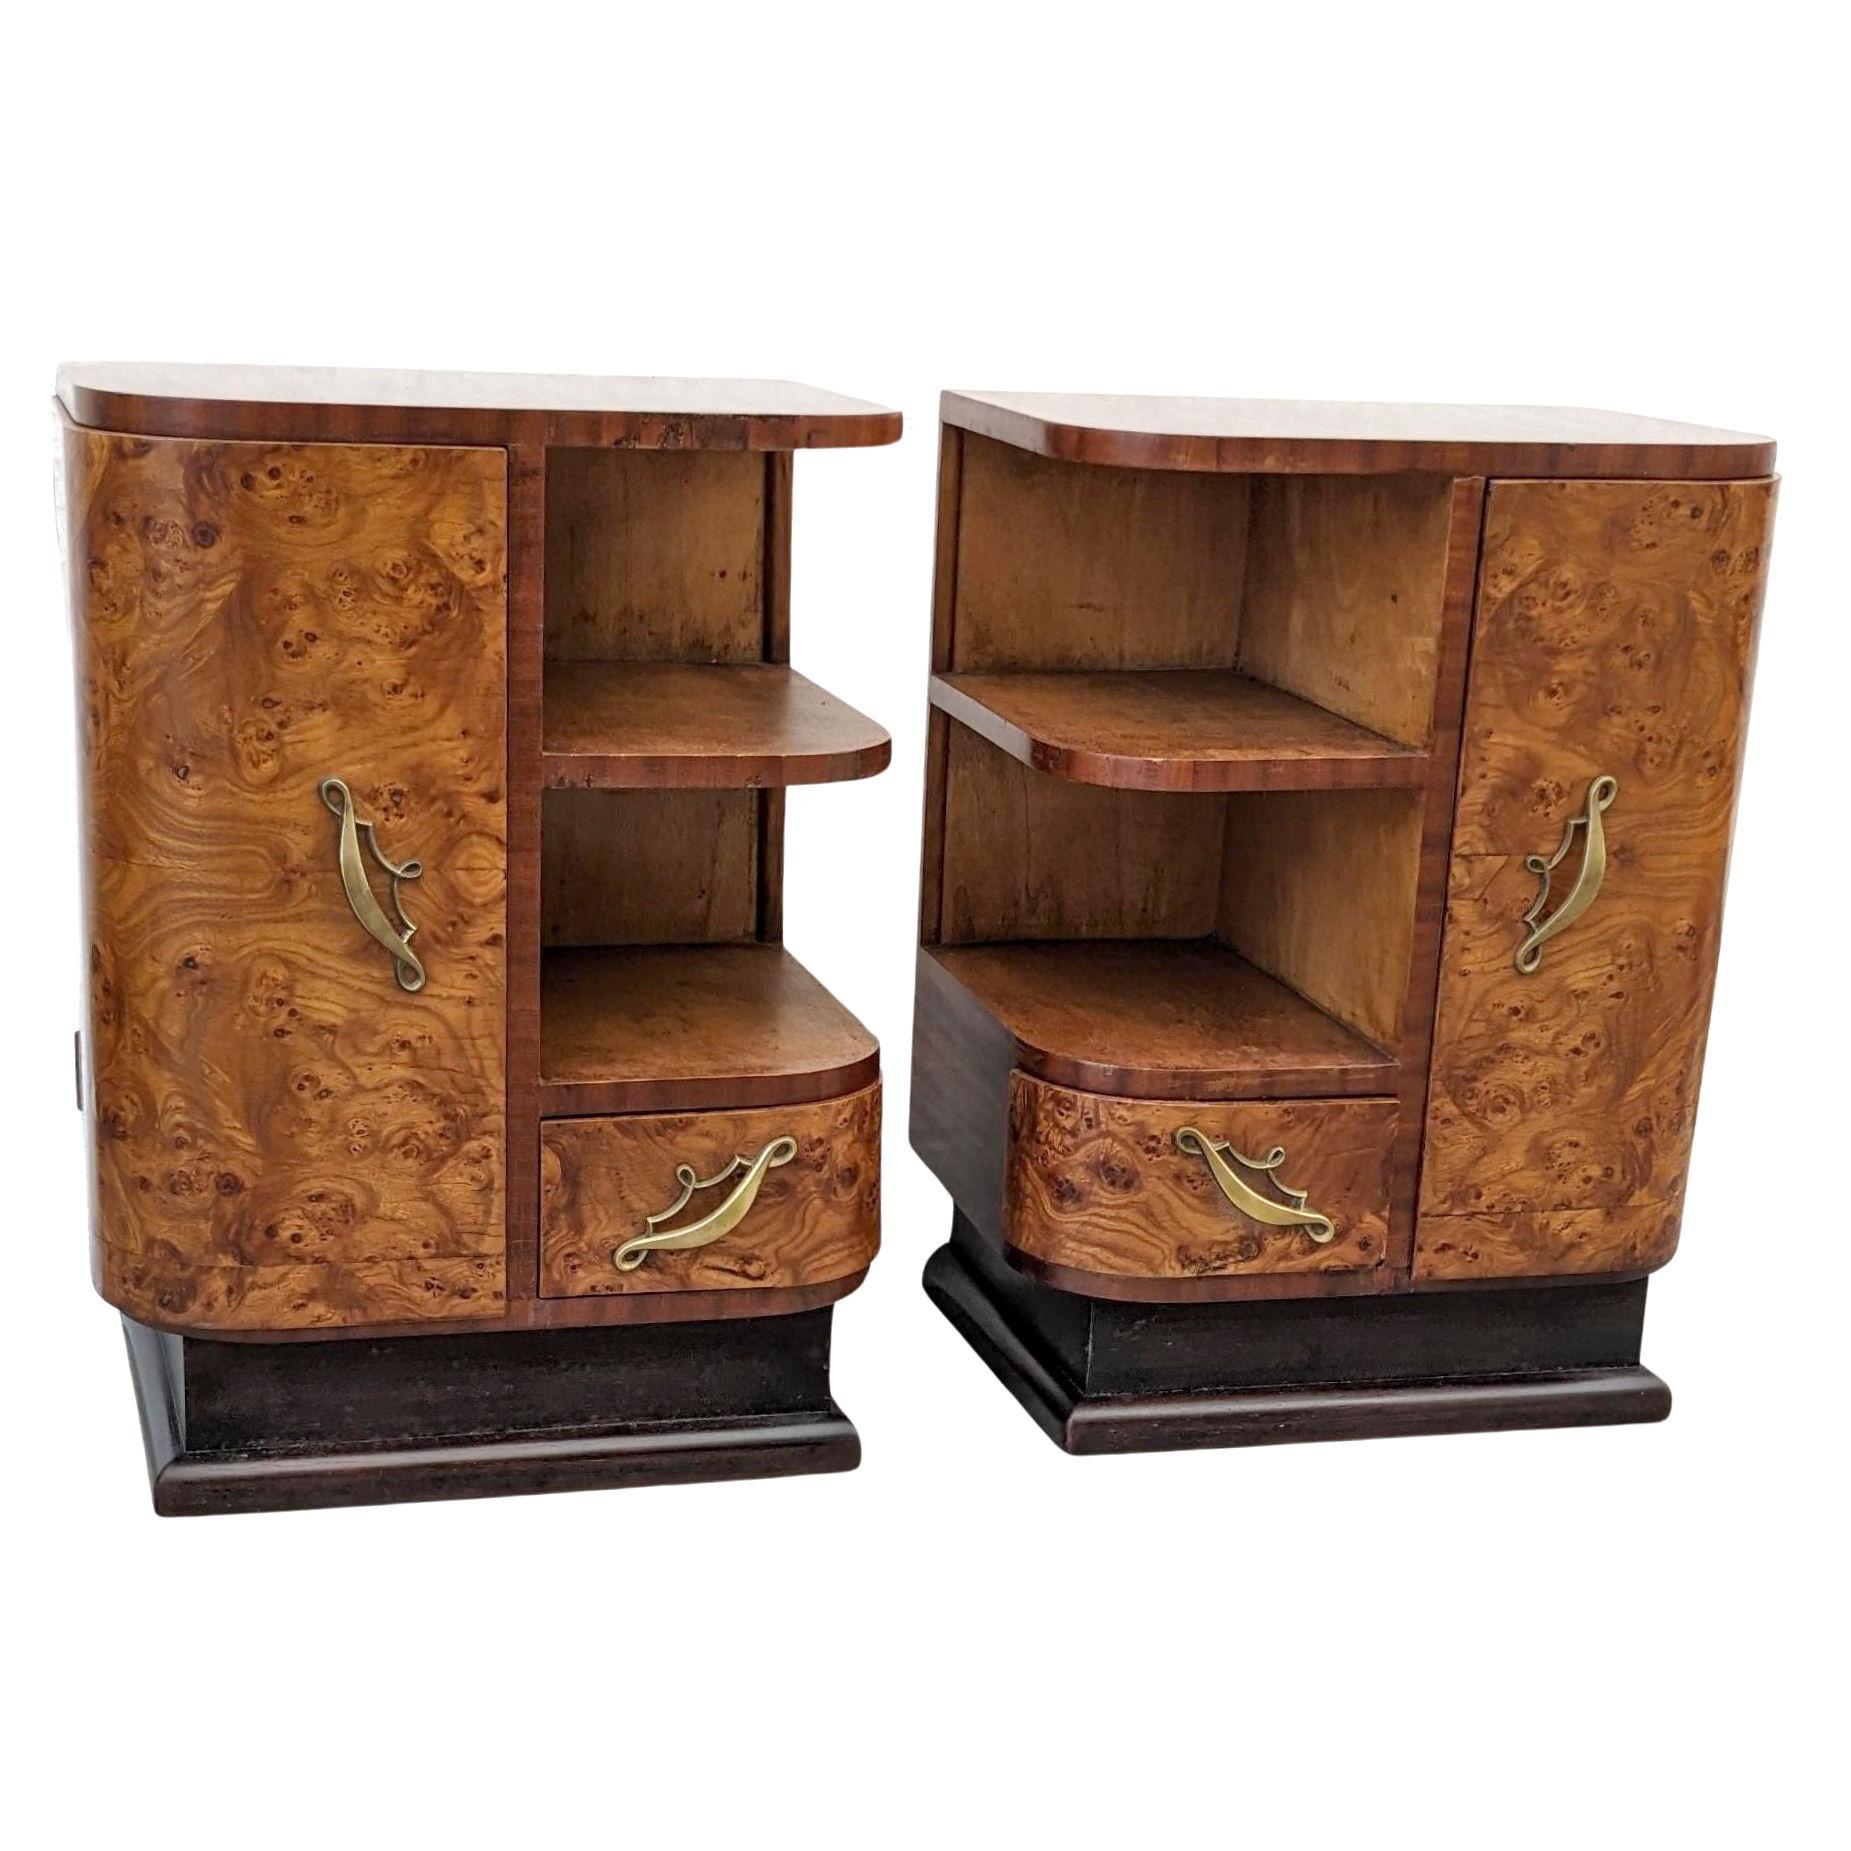 Spectacular Art Deco Pair Matching of Italian Bedside Table Nightstands, c1930 For Sale 2